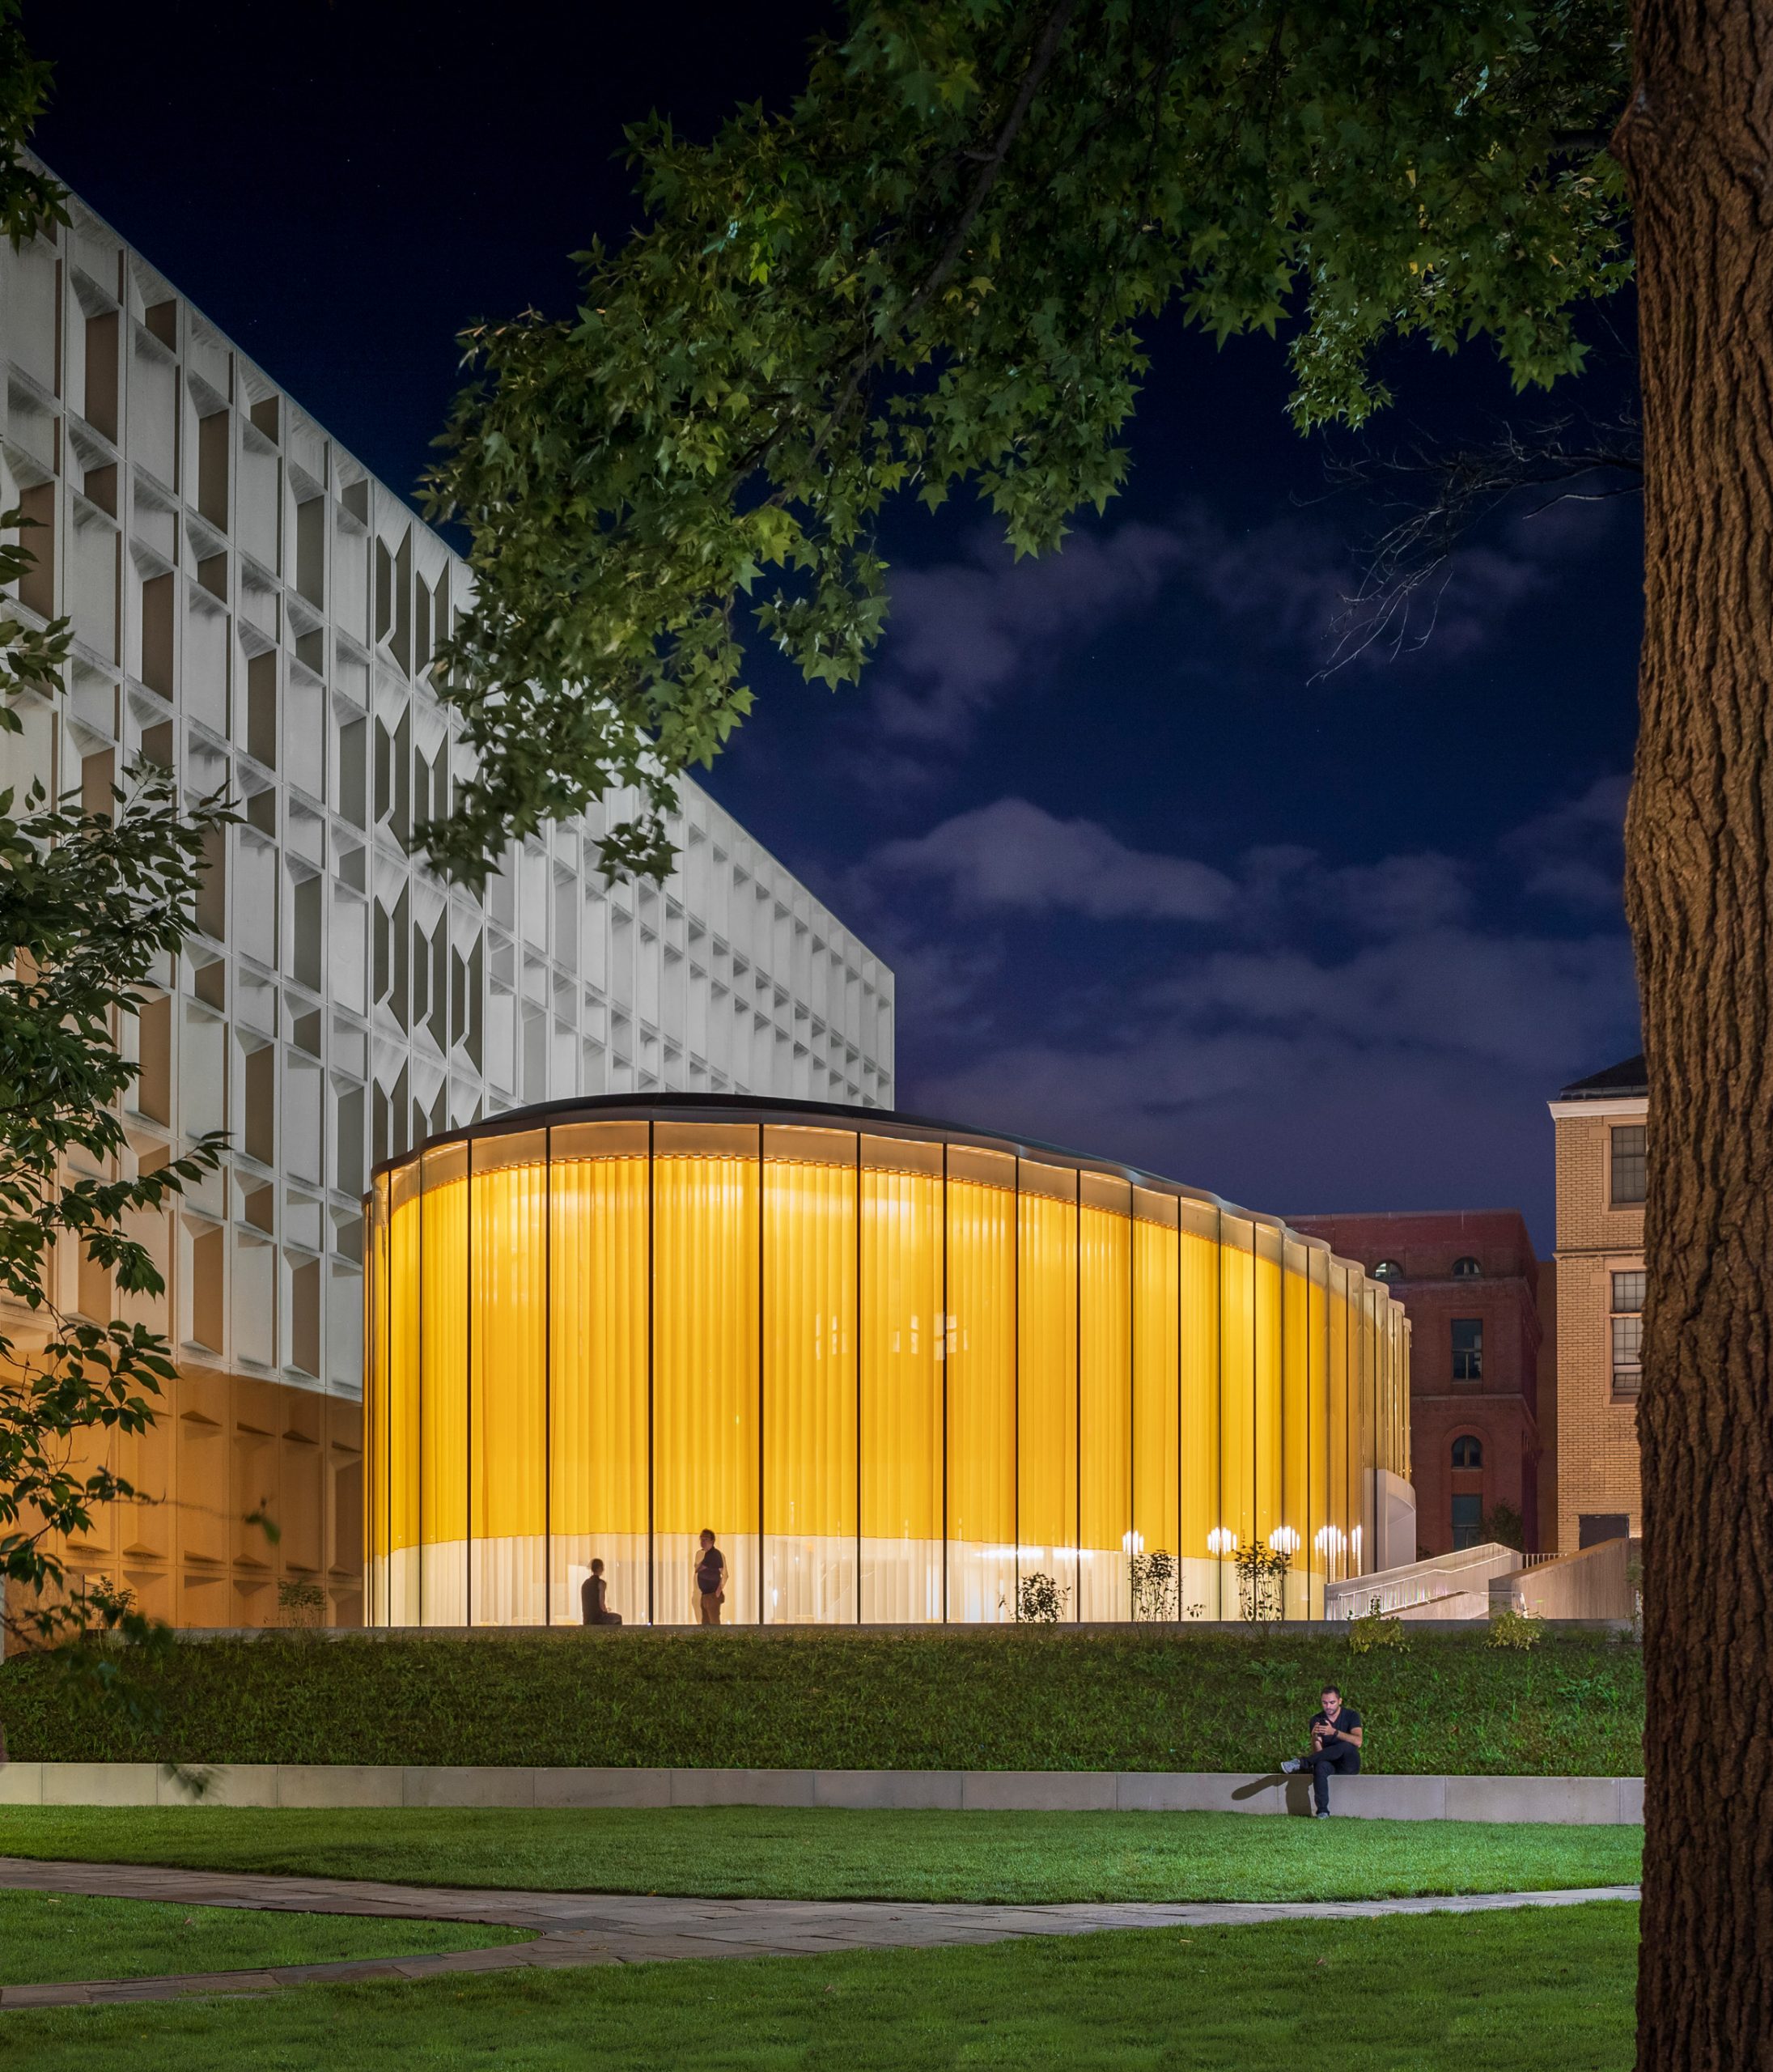 Night time view of student centre by Weiss/Manfredi